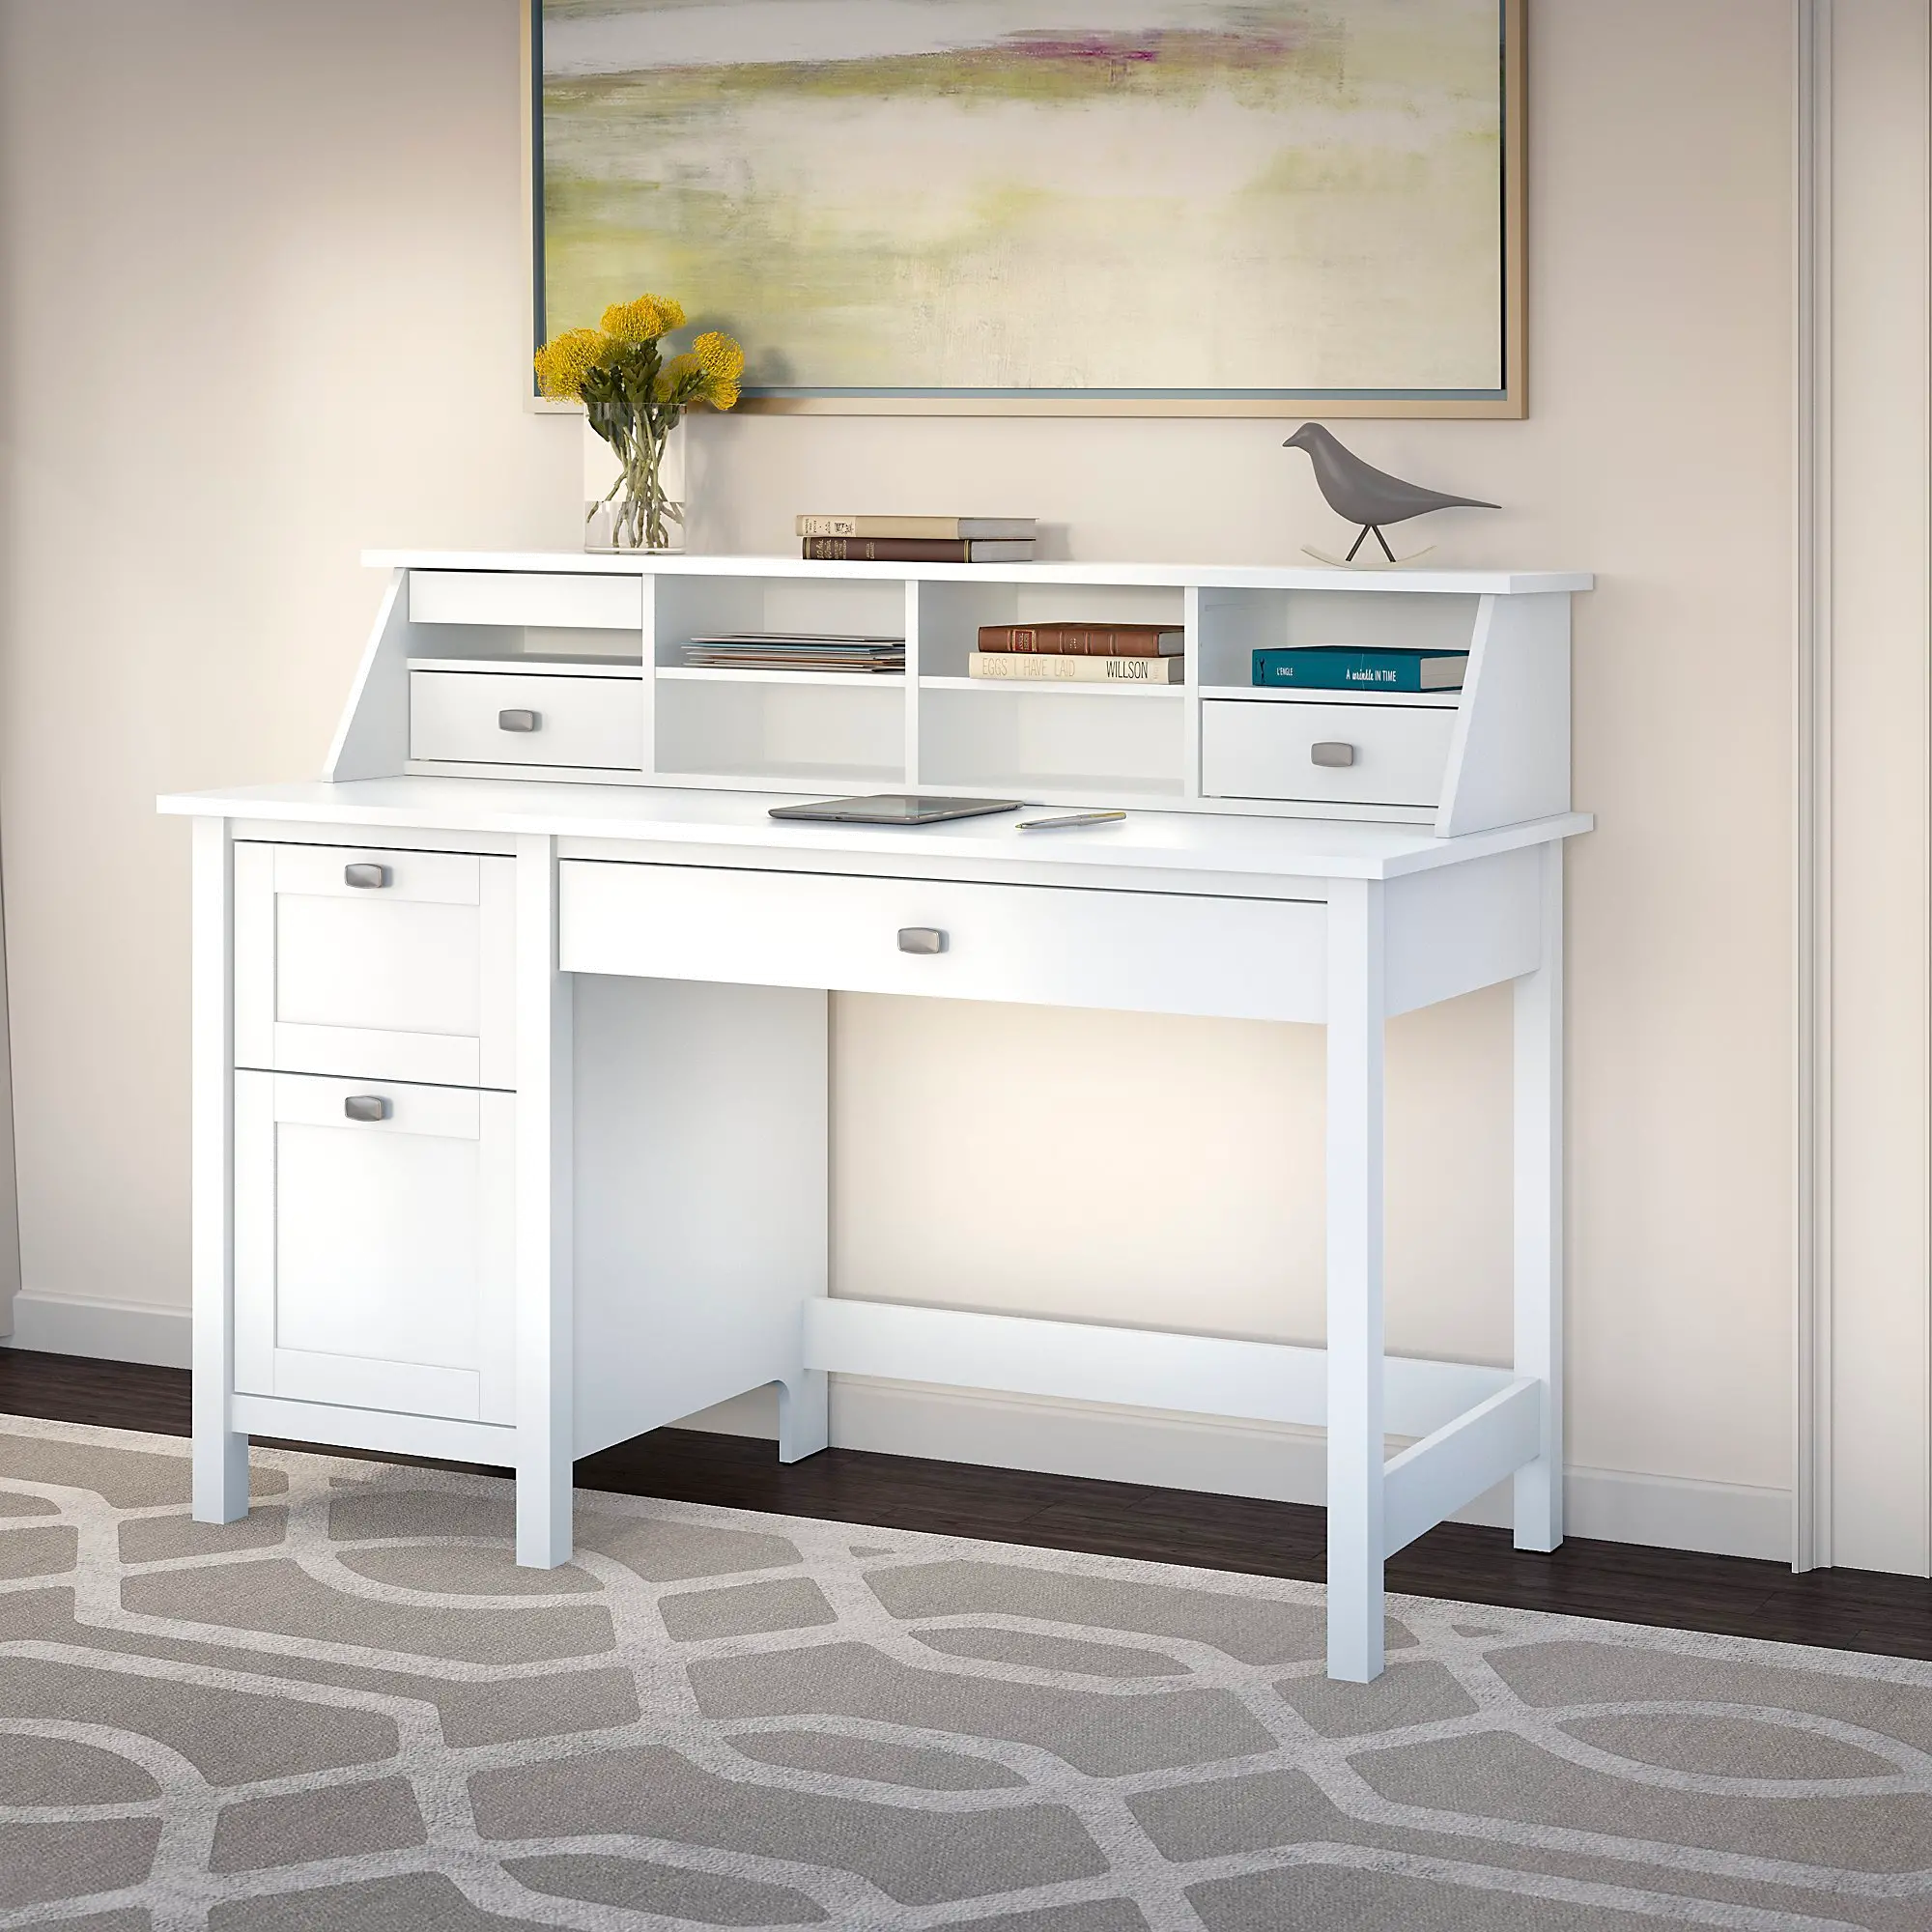 BD005WH Broadview Computer Desk with 2 Drawer Pedestal and sku BD005WH